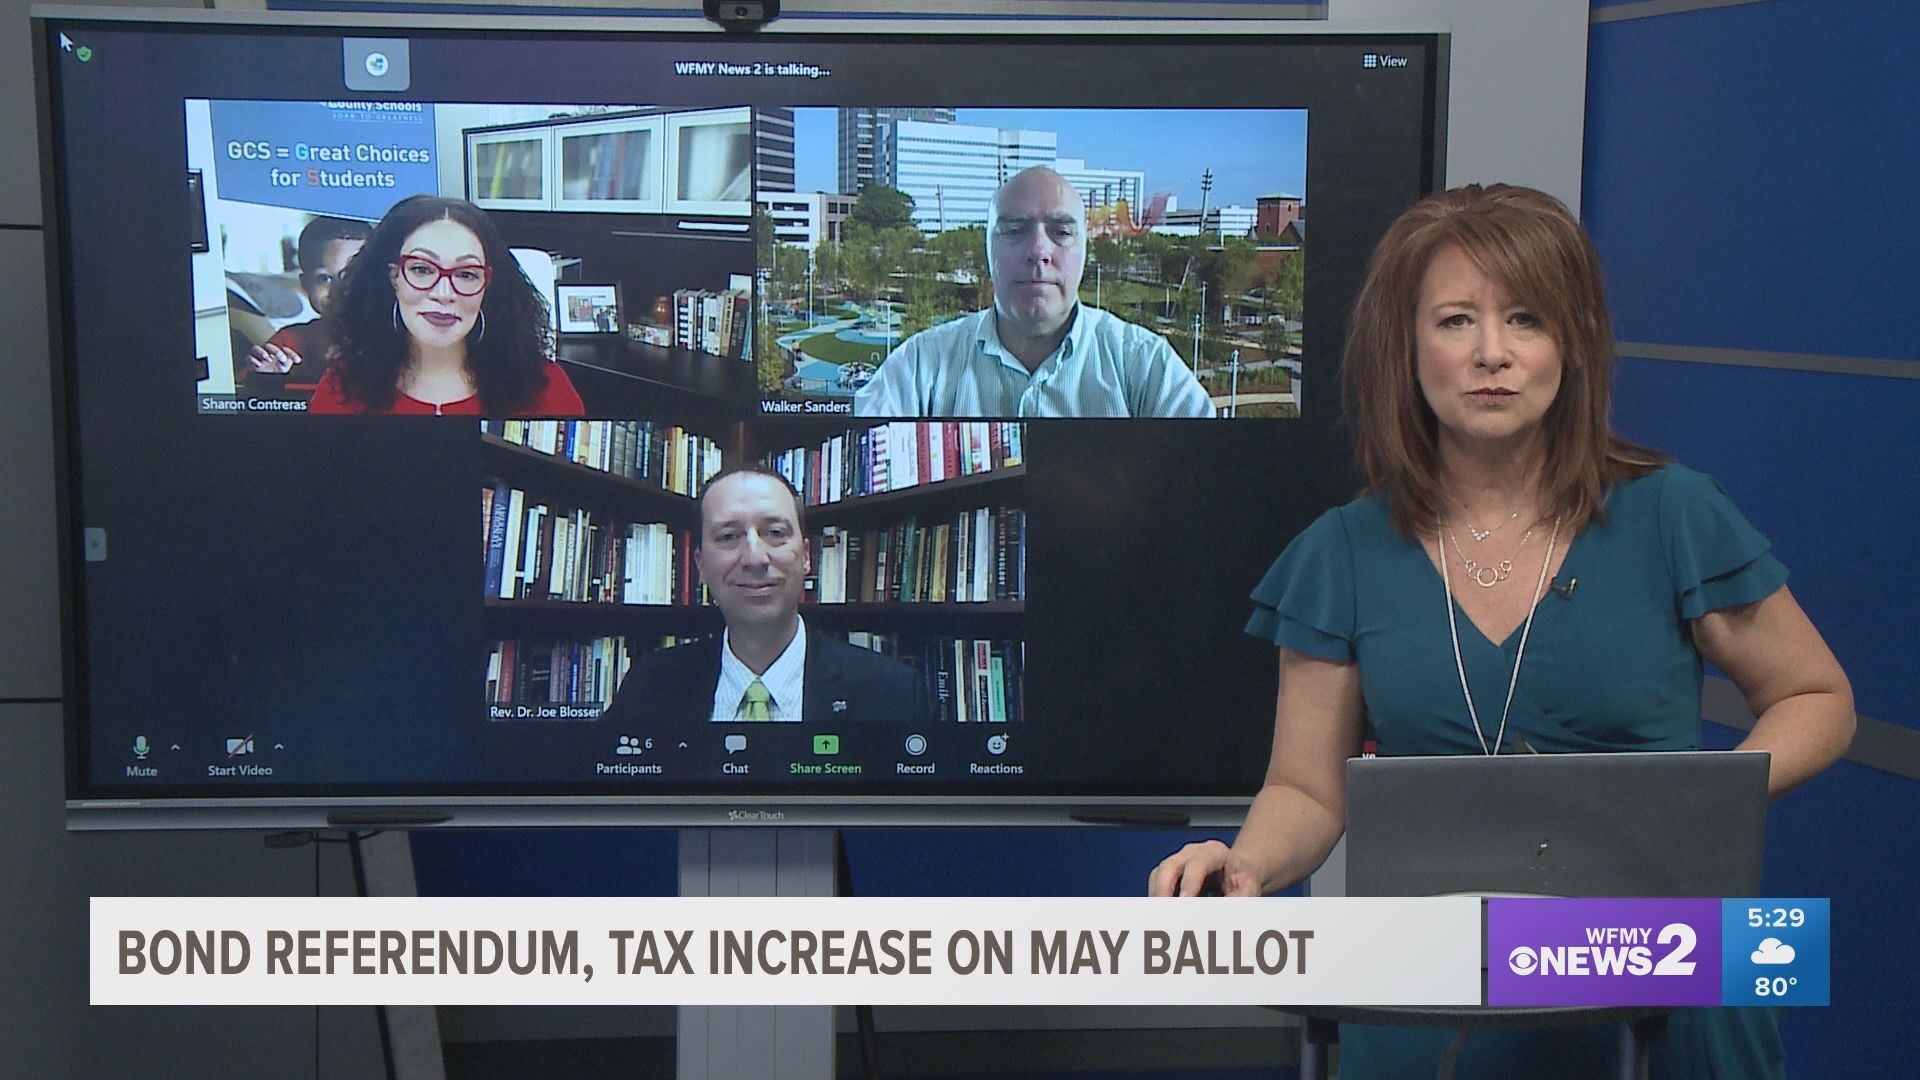 Guilford County residents can vote to approve a $1.7 billion bond referendum in the May 17 election. They can also choose to pass a 0.25% sales tax increase.